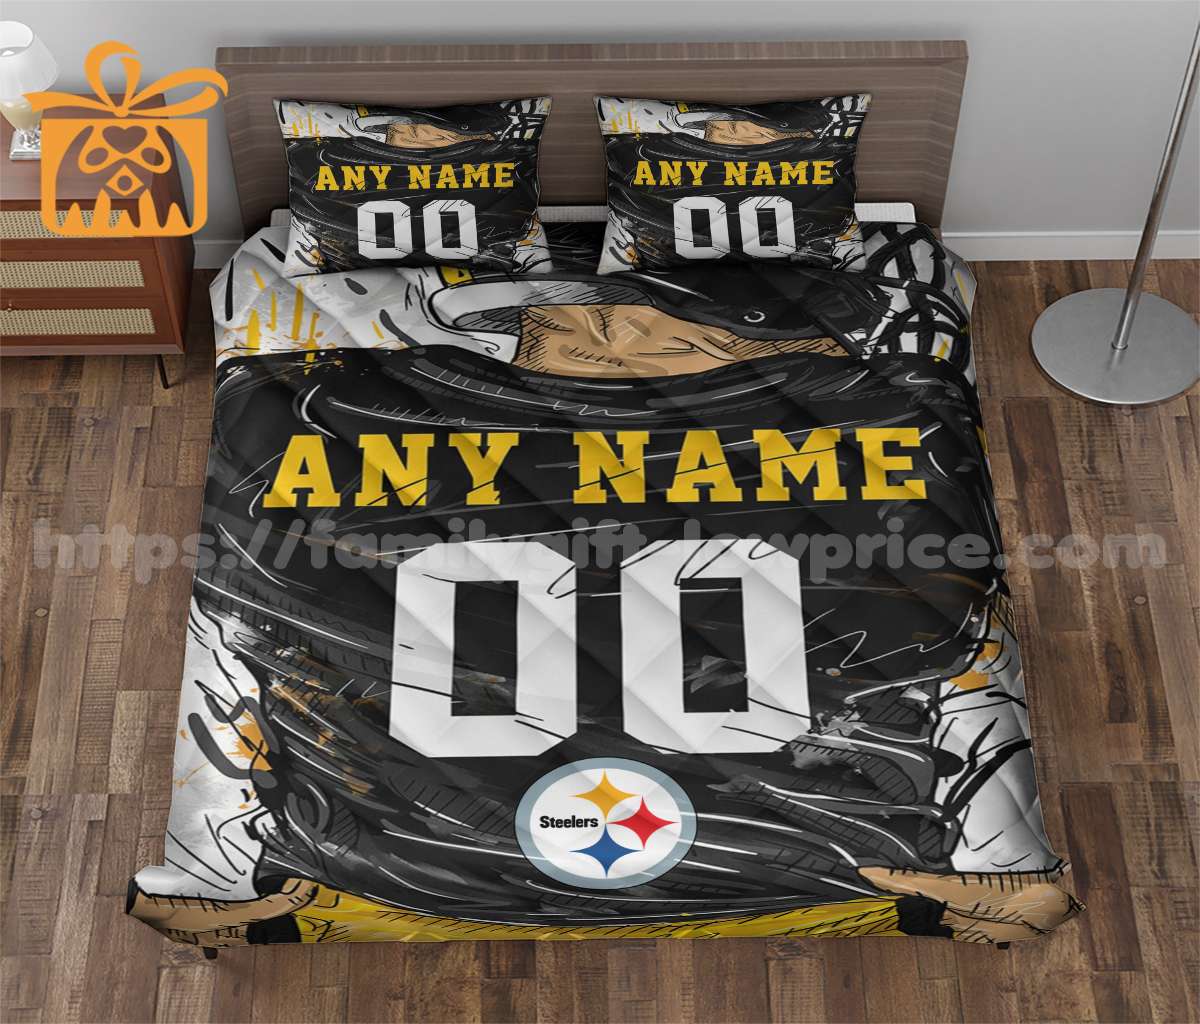 NFL Steelers Jersey Customized Quilt Bedding Set - Custom Any Name and Number for Men Women